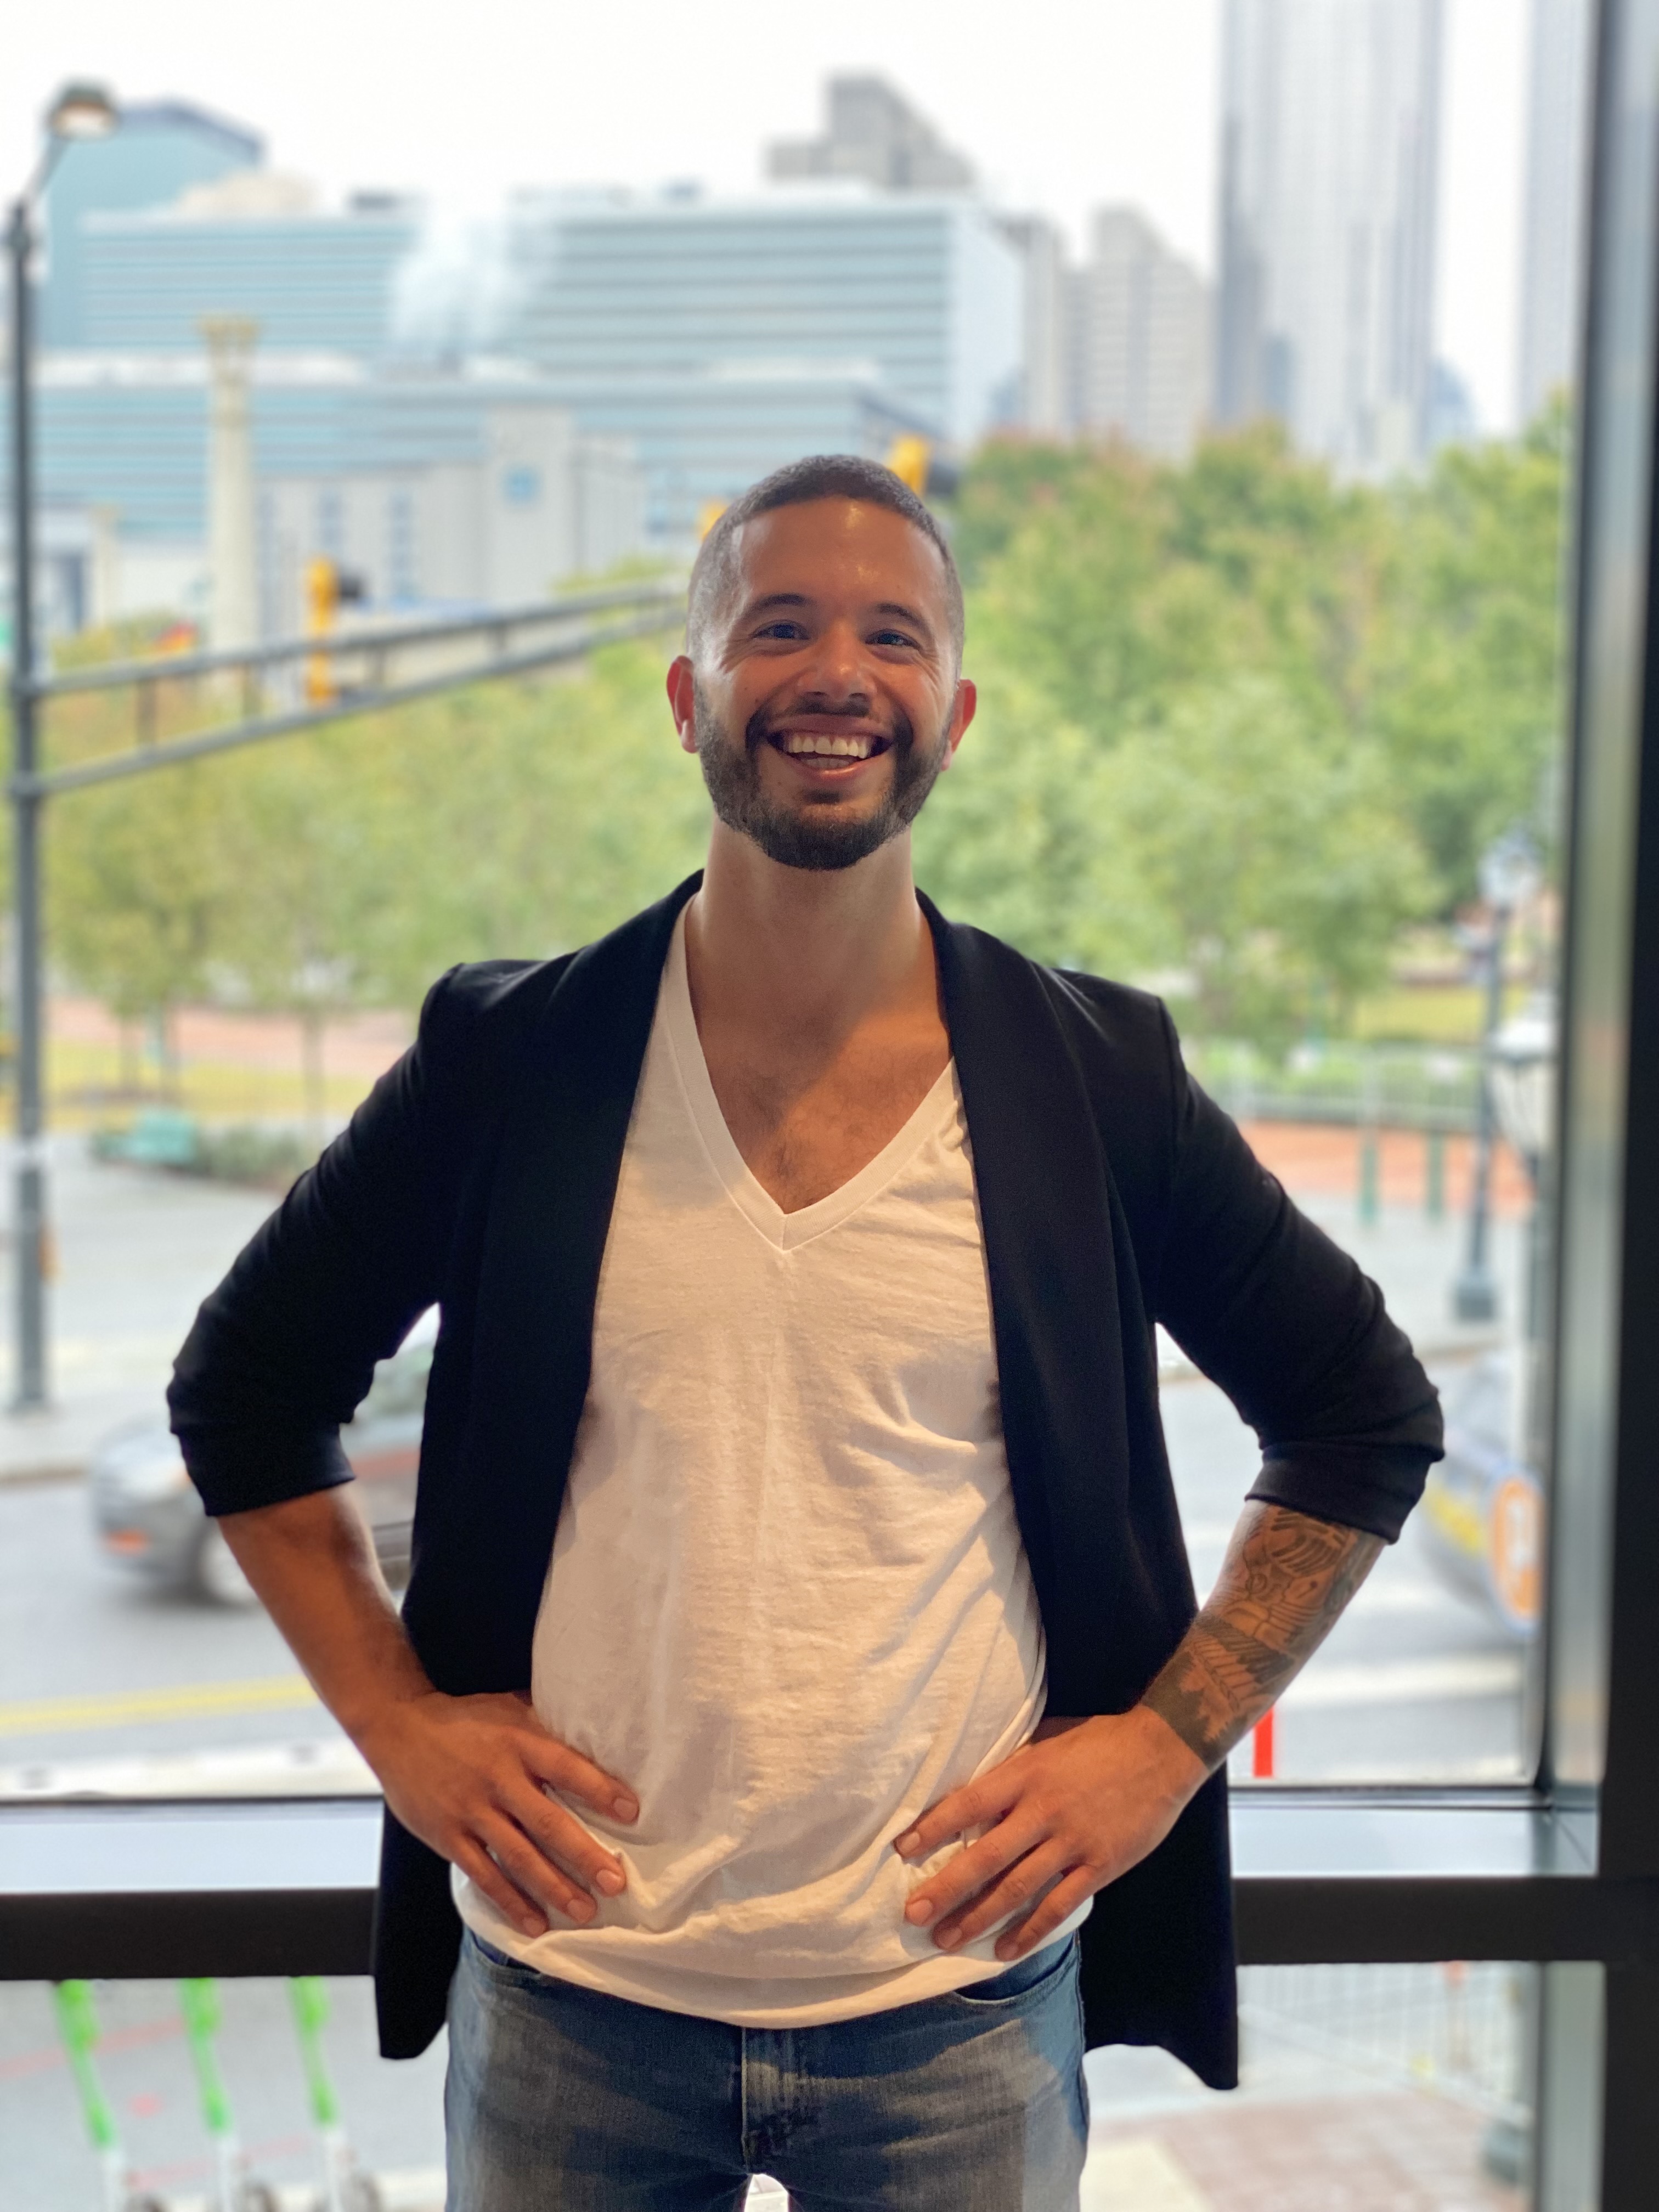 Ryan Brennan is the Founder/CEO of Atlanta Personal Fitness. He has a Masters Degree in Exercise Science, 12+ years in the Fitness Industry and has coached thousands of clients to a healthy sustainable lifestyle. He also has two gigantic golden-doodles and loves a good cup of coffee.